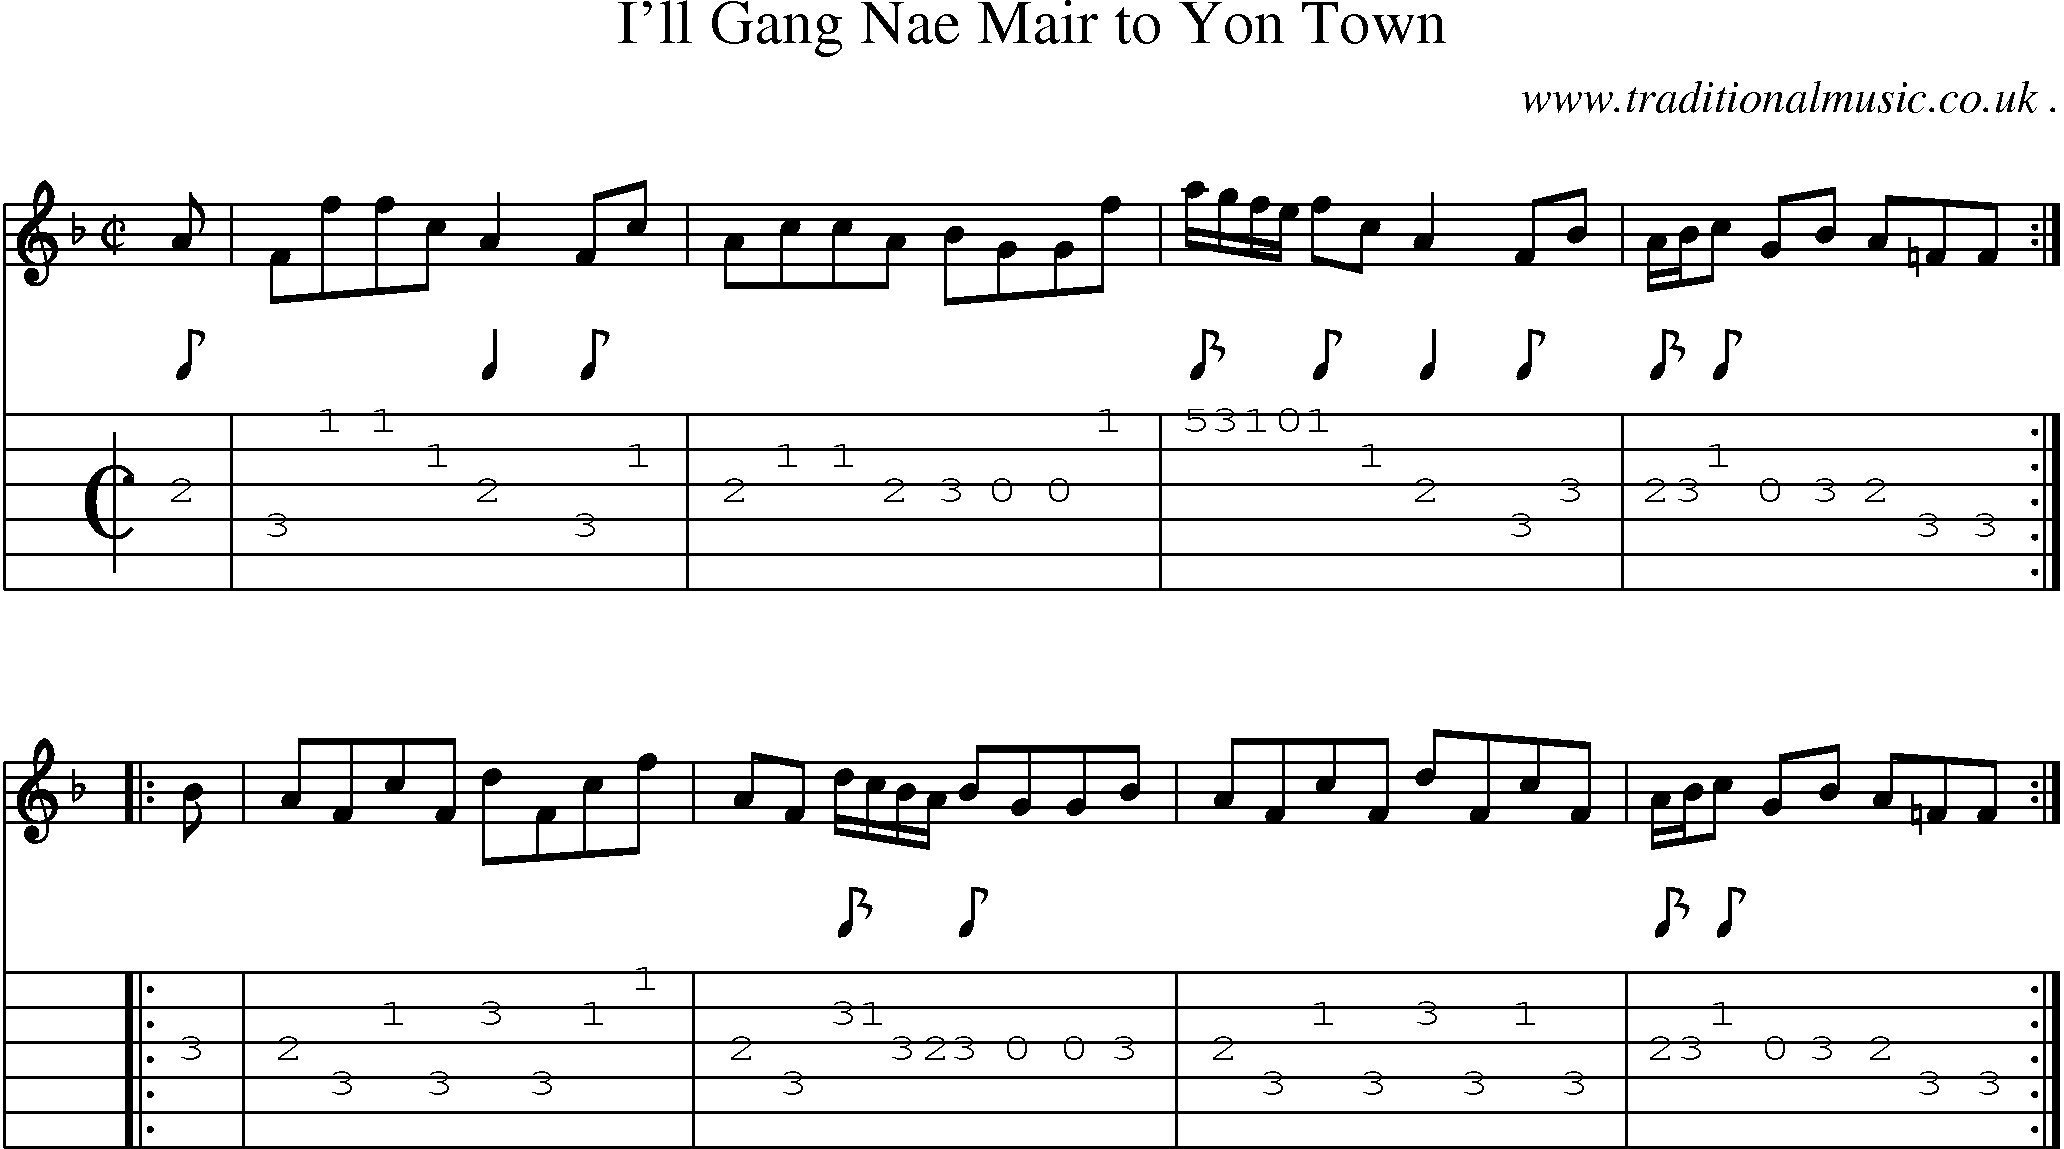 Sheet-music  score, Chords and Guitar Tabs for Ill Gang Nae Mair To Yon Town